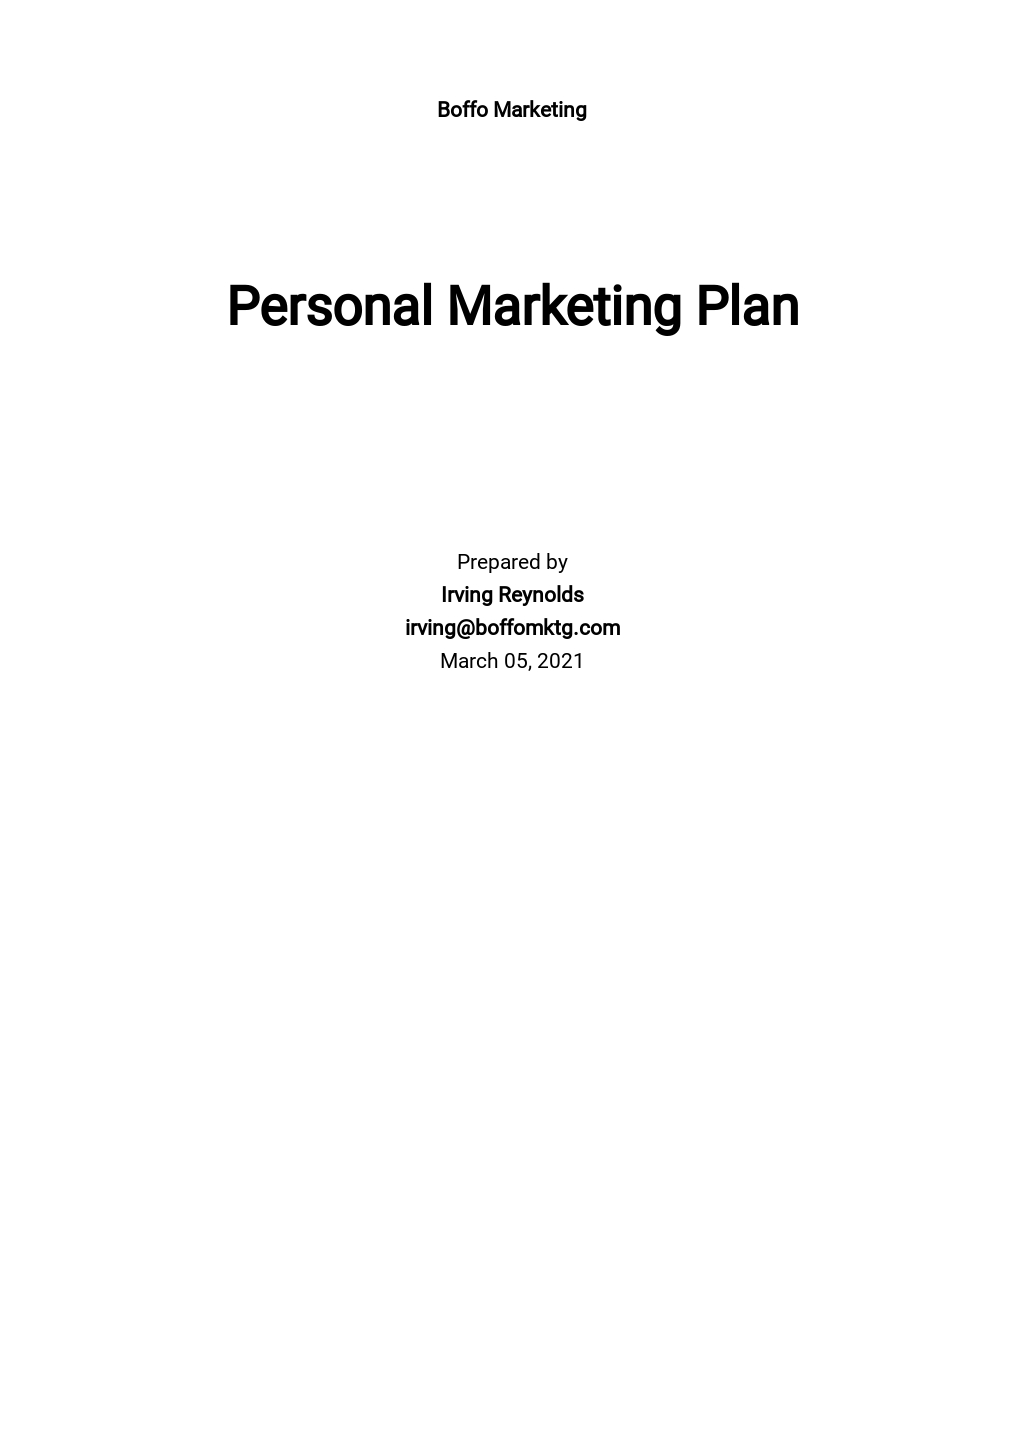 Personal Training Business Plan Template Free